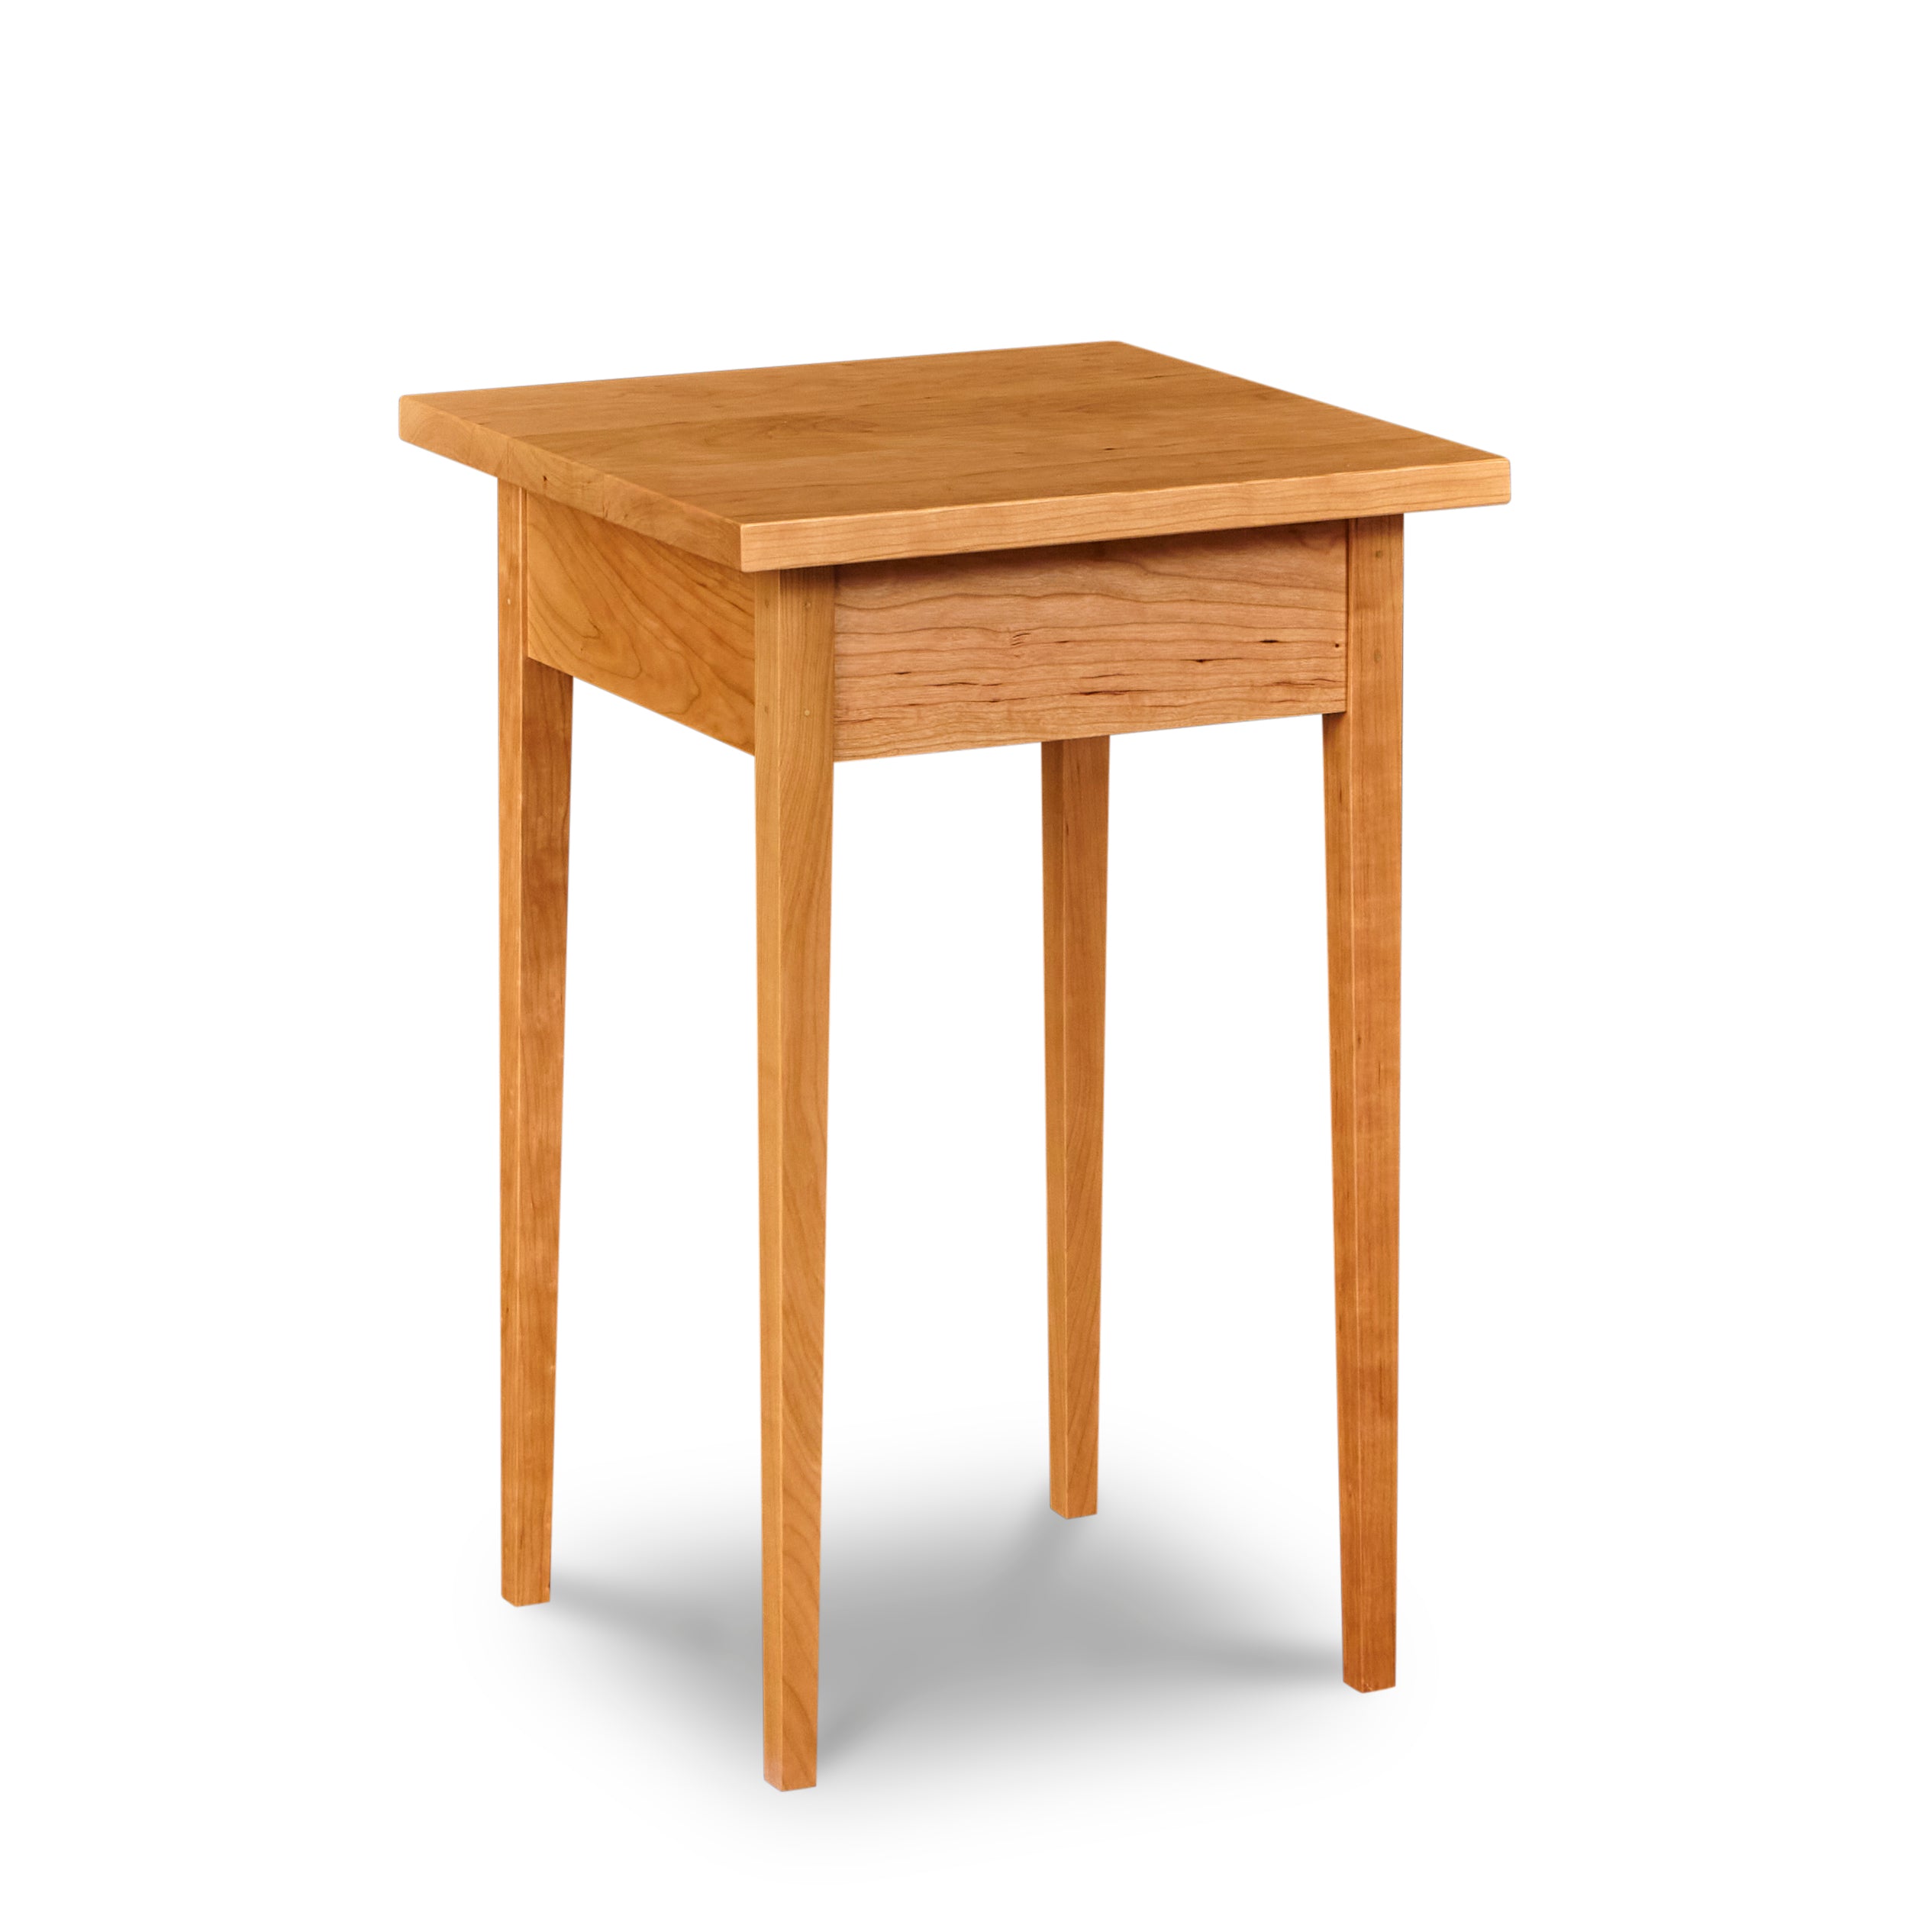 Simple Shaker style square side table in cherry